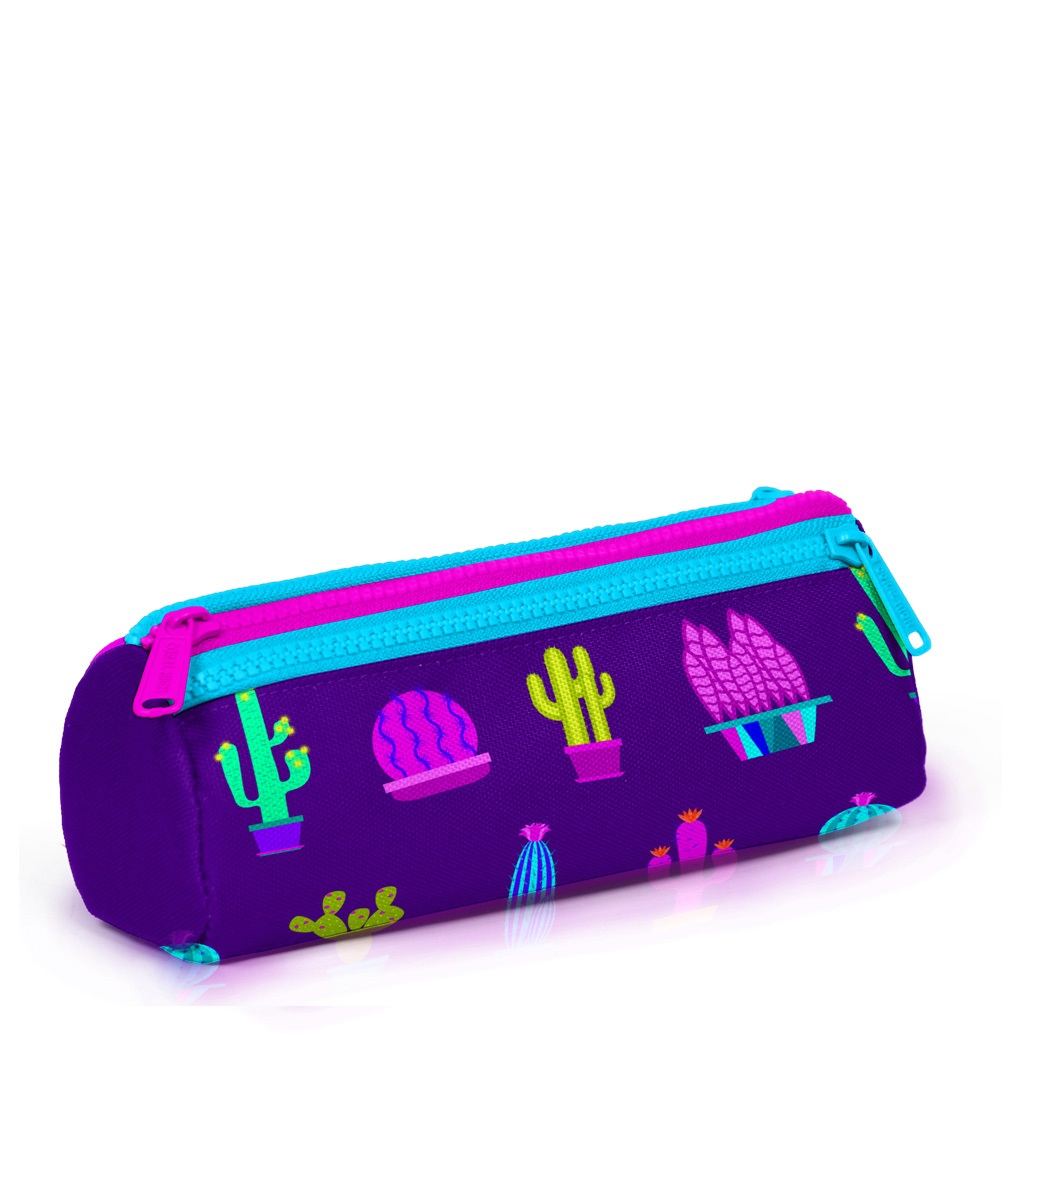 Coral High Kids Three Compartment Pencil case - Purple Pink Cactus Patterned